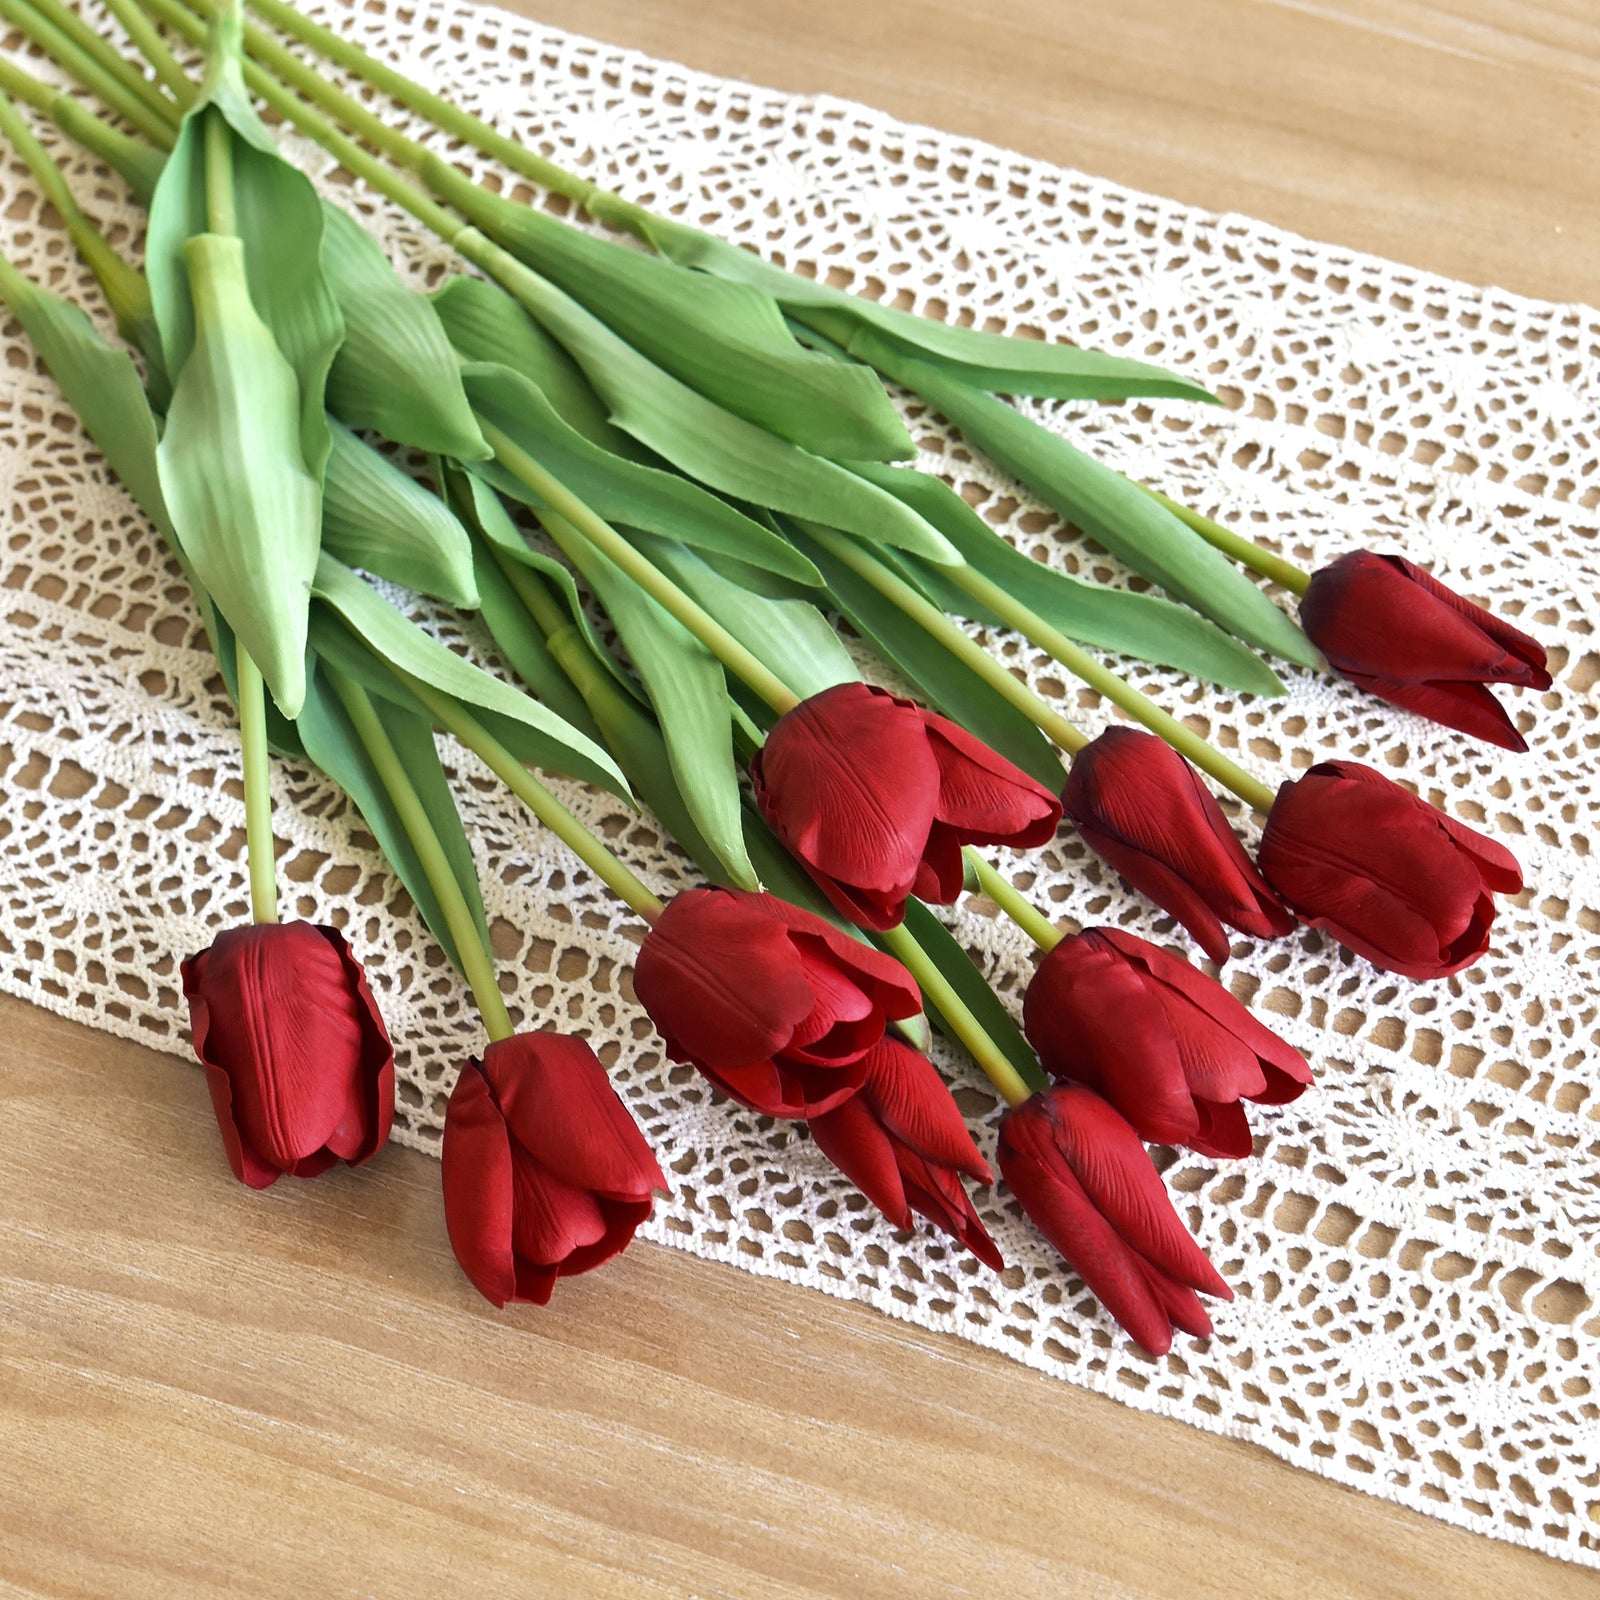 FiveSeasonStuff 10 Stems of (Classic Red) Soft and Long Stem Real Touch Tulip Artificial Flowers Bouquet, Wedding, Bridal, Home Decor